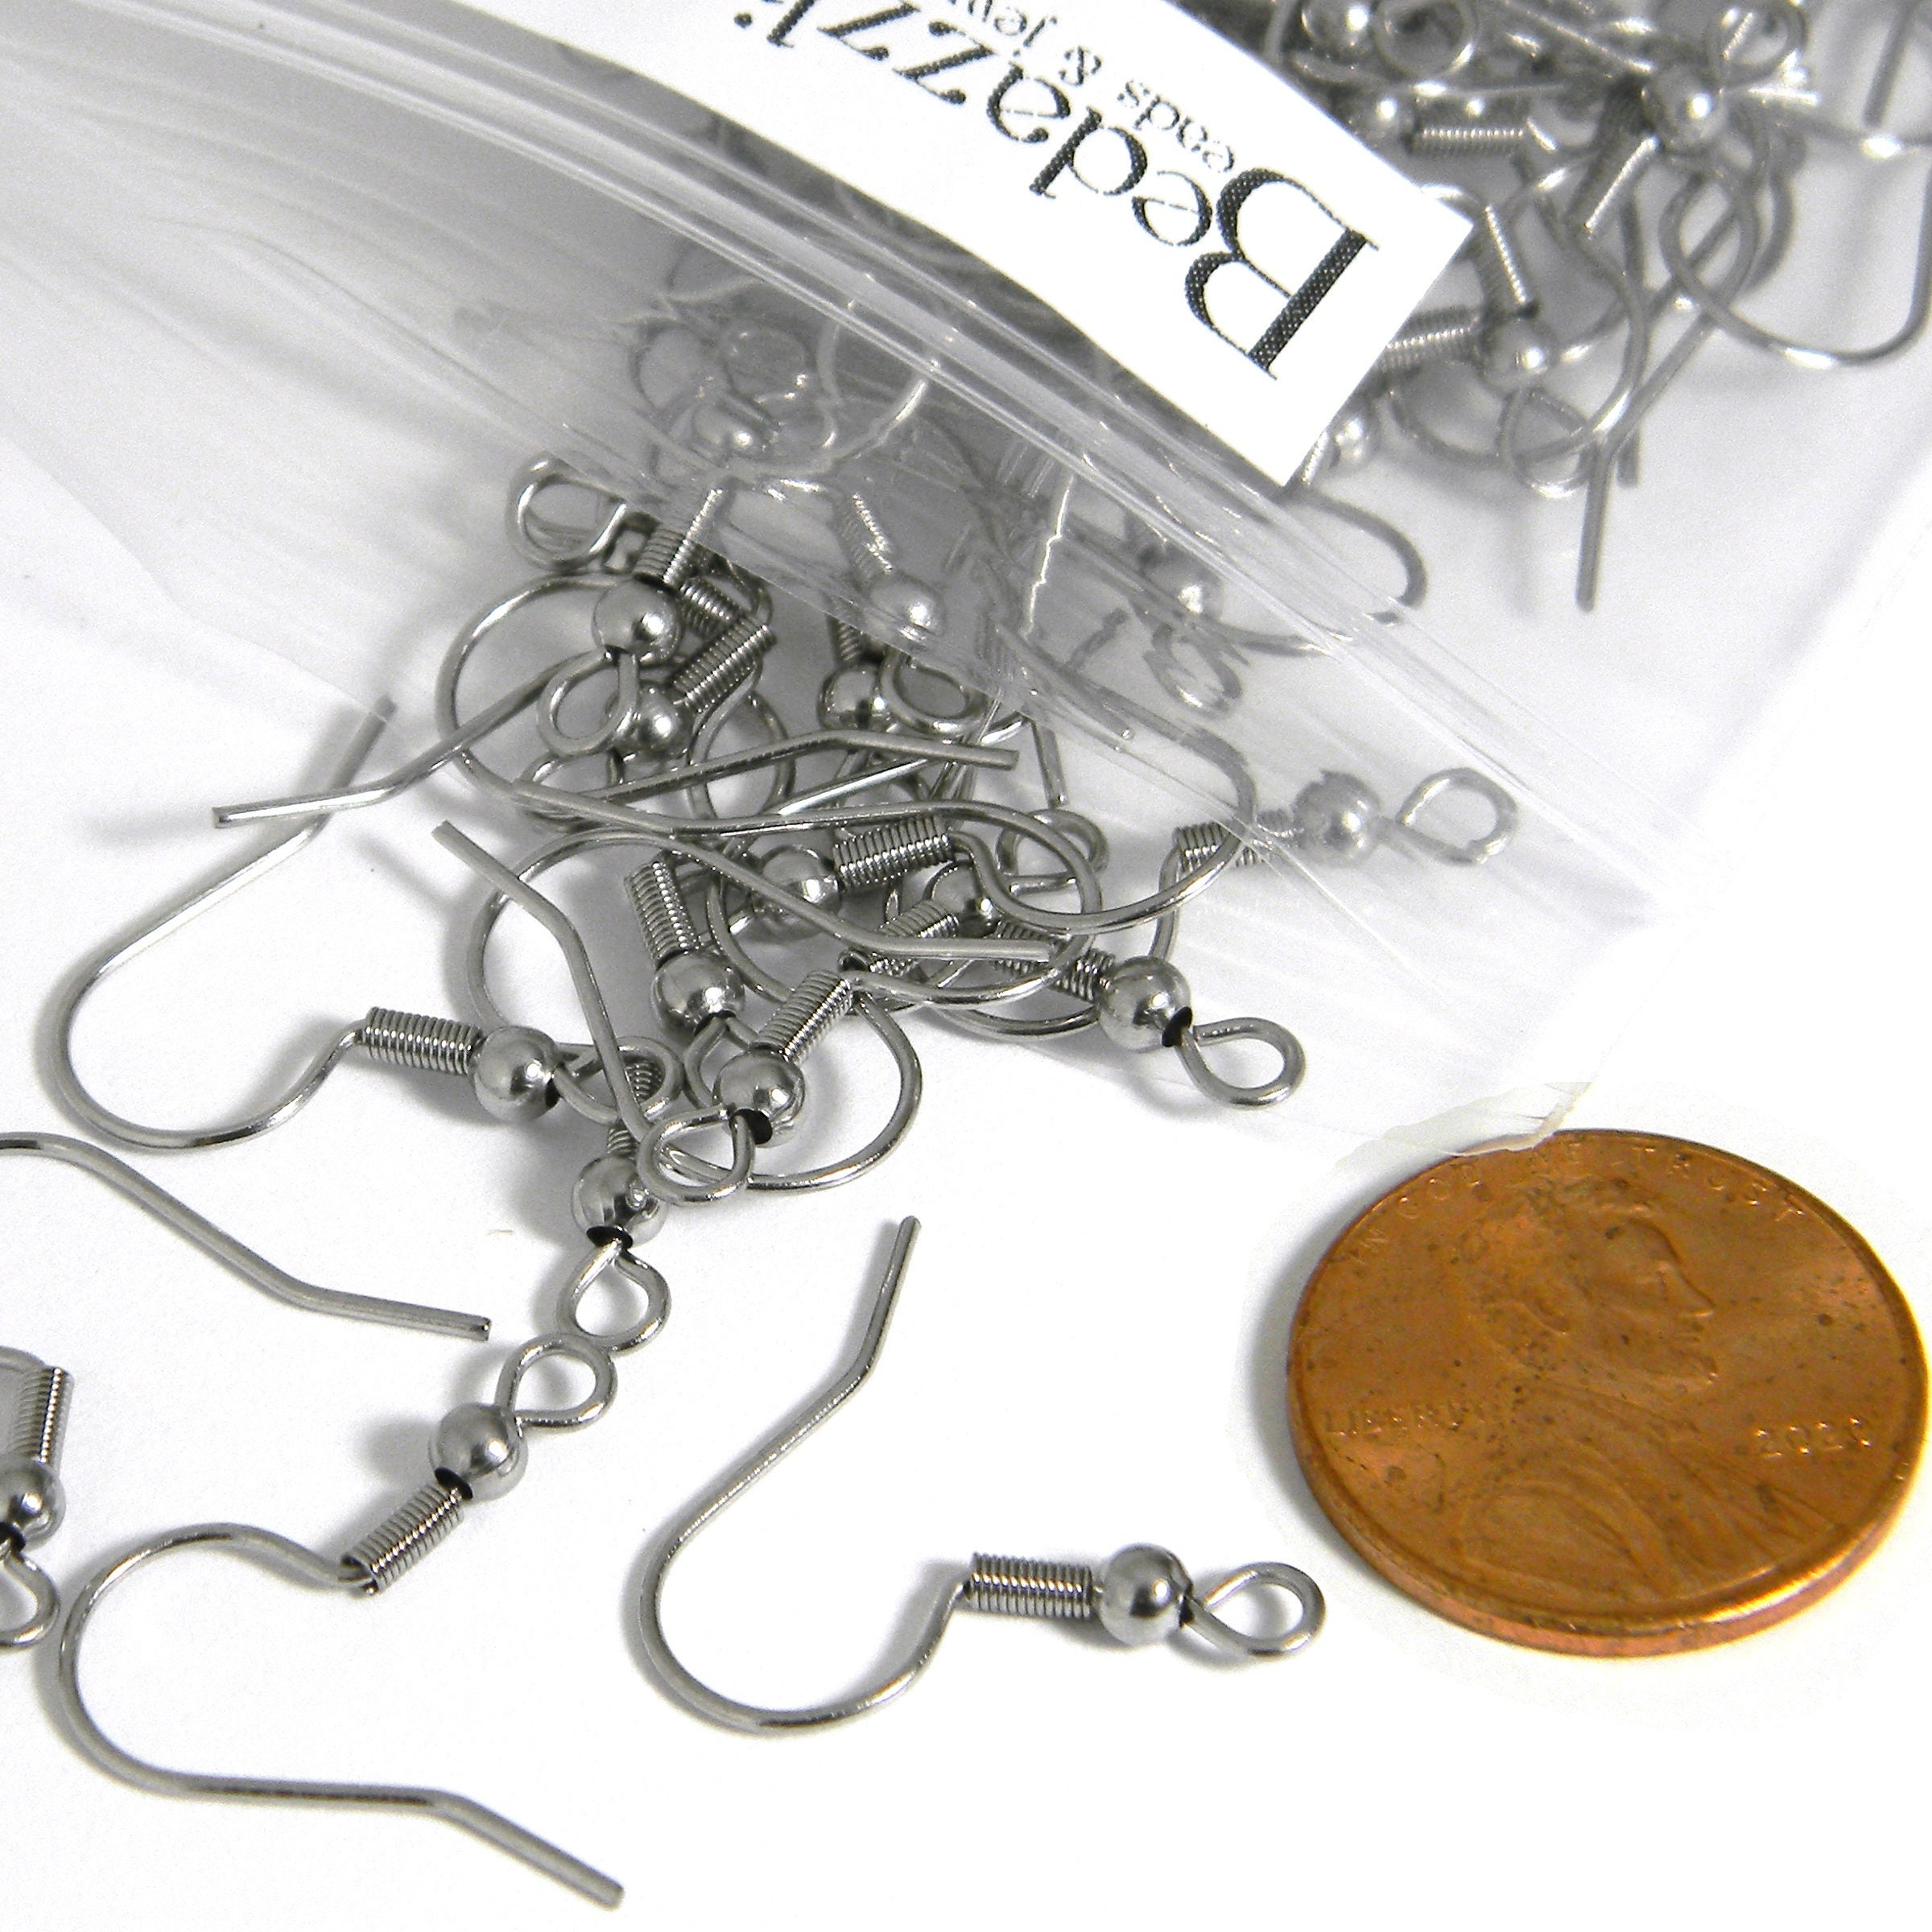 Surgical Steel Earring Earwires Hypoallergenic Fishhook Silver-plated Ball  and Coil with Open Loop, 21 Gauge. 100 Pairs. (200)